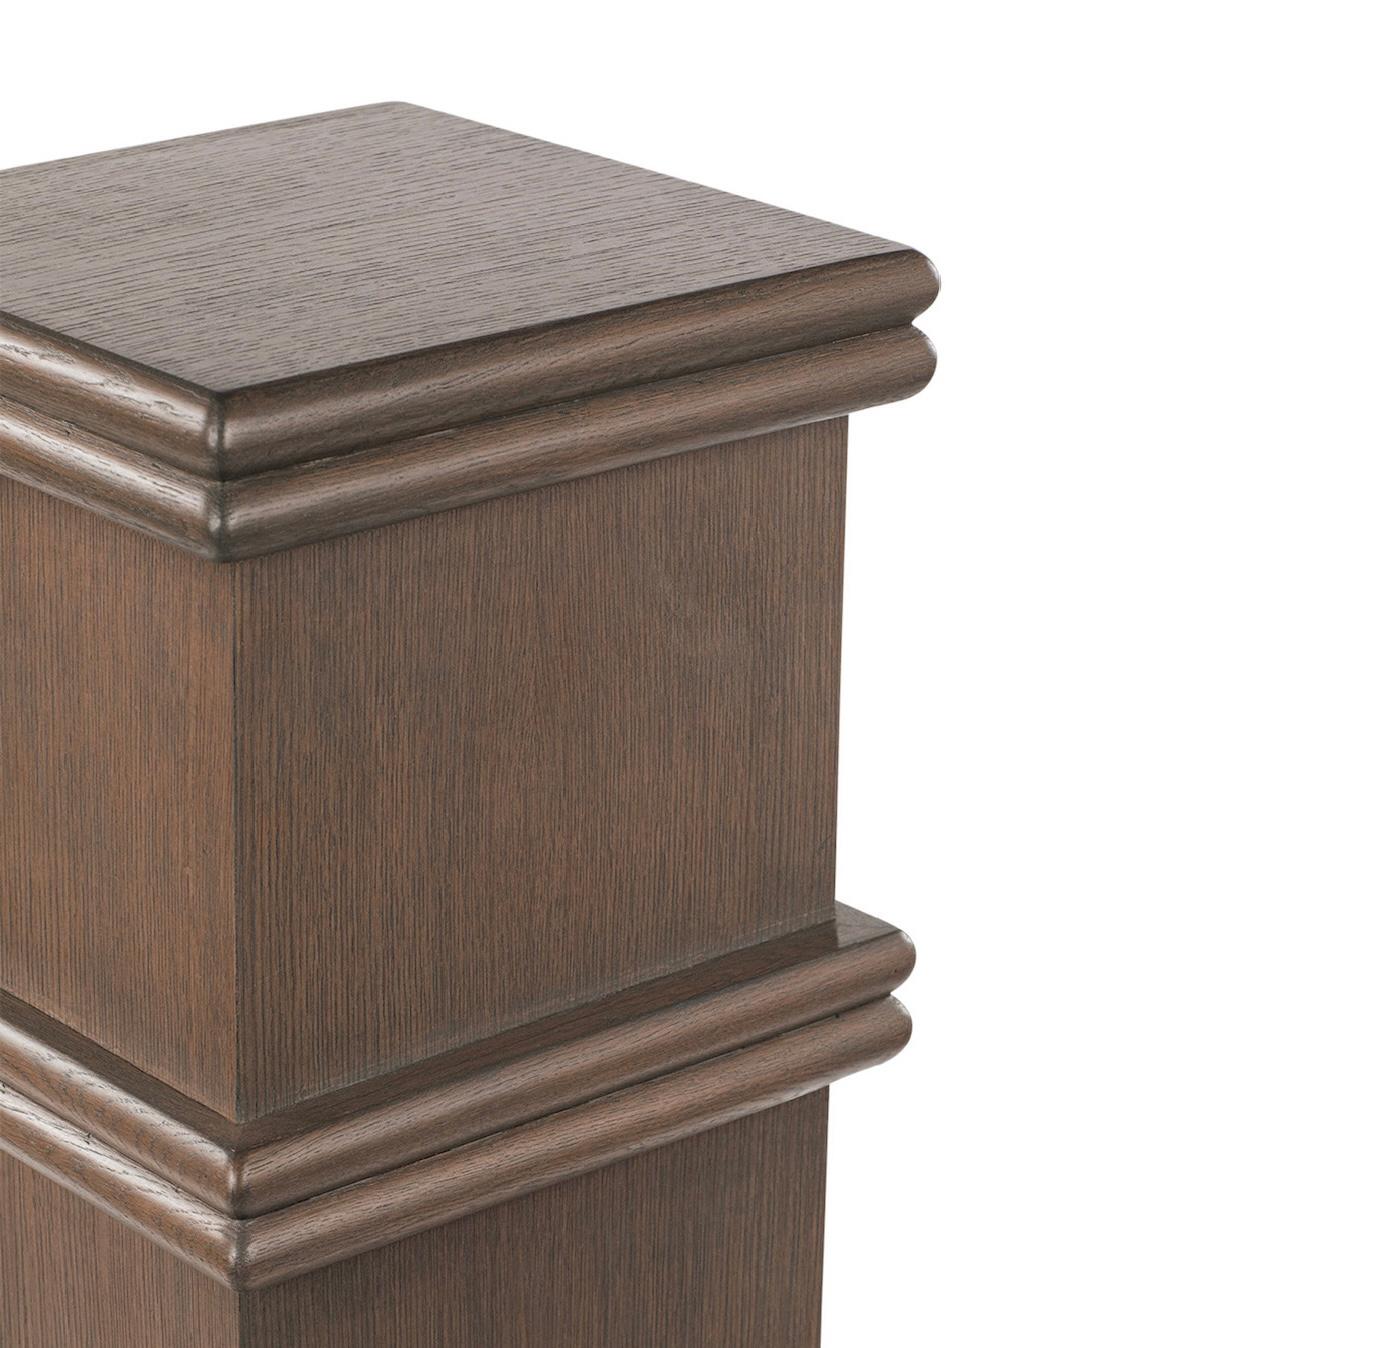 Designed by Josh Greene.
Sculptural square oak pedestal with rounded dowel applications. 